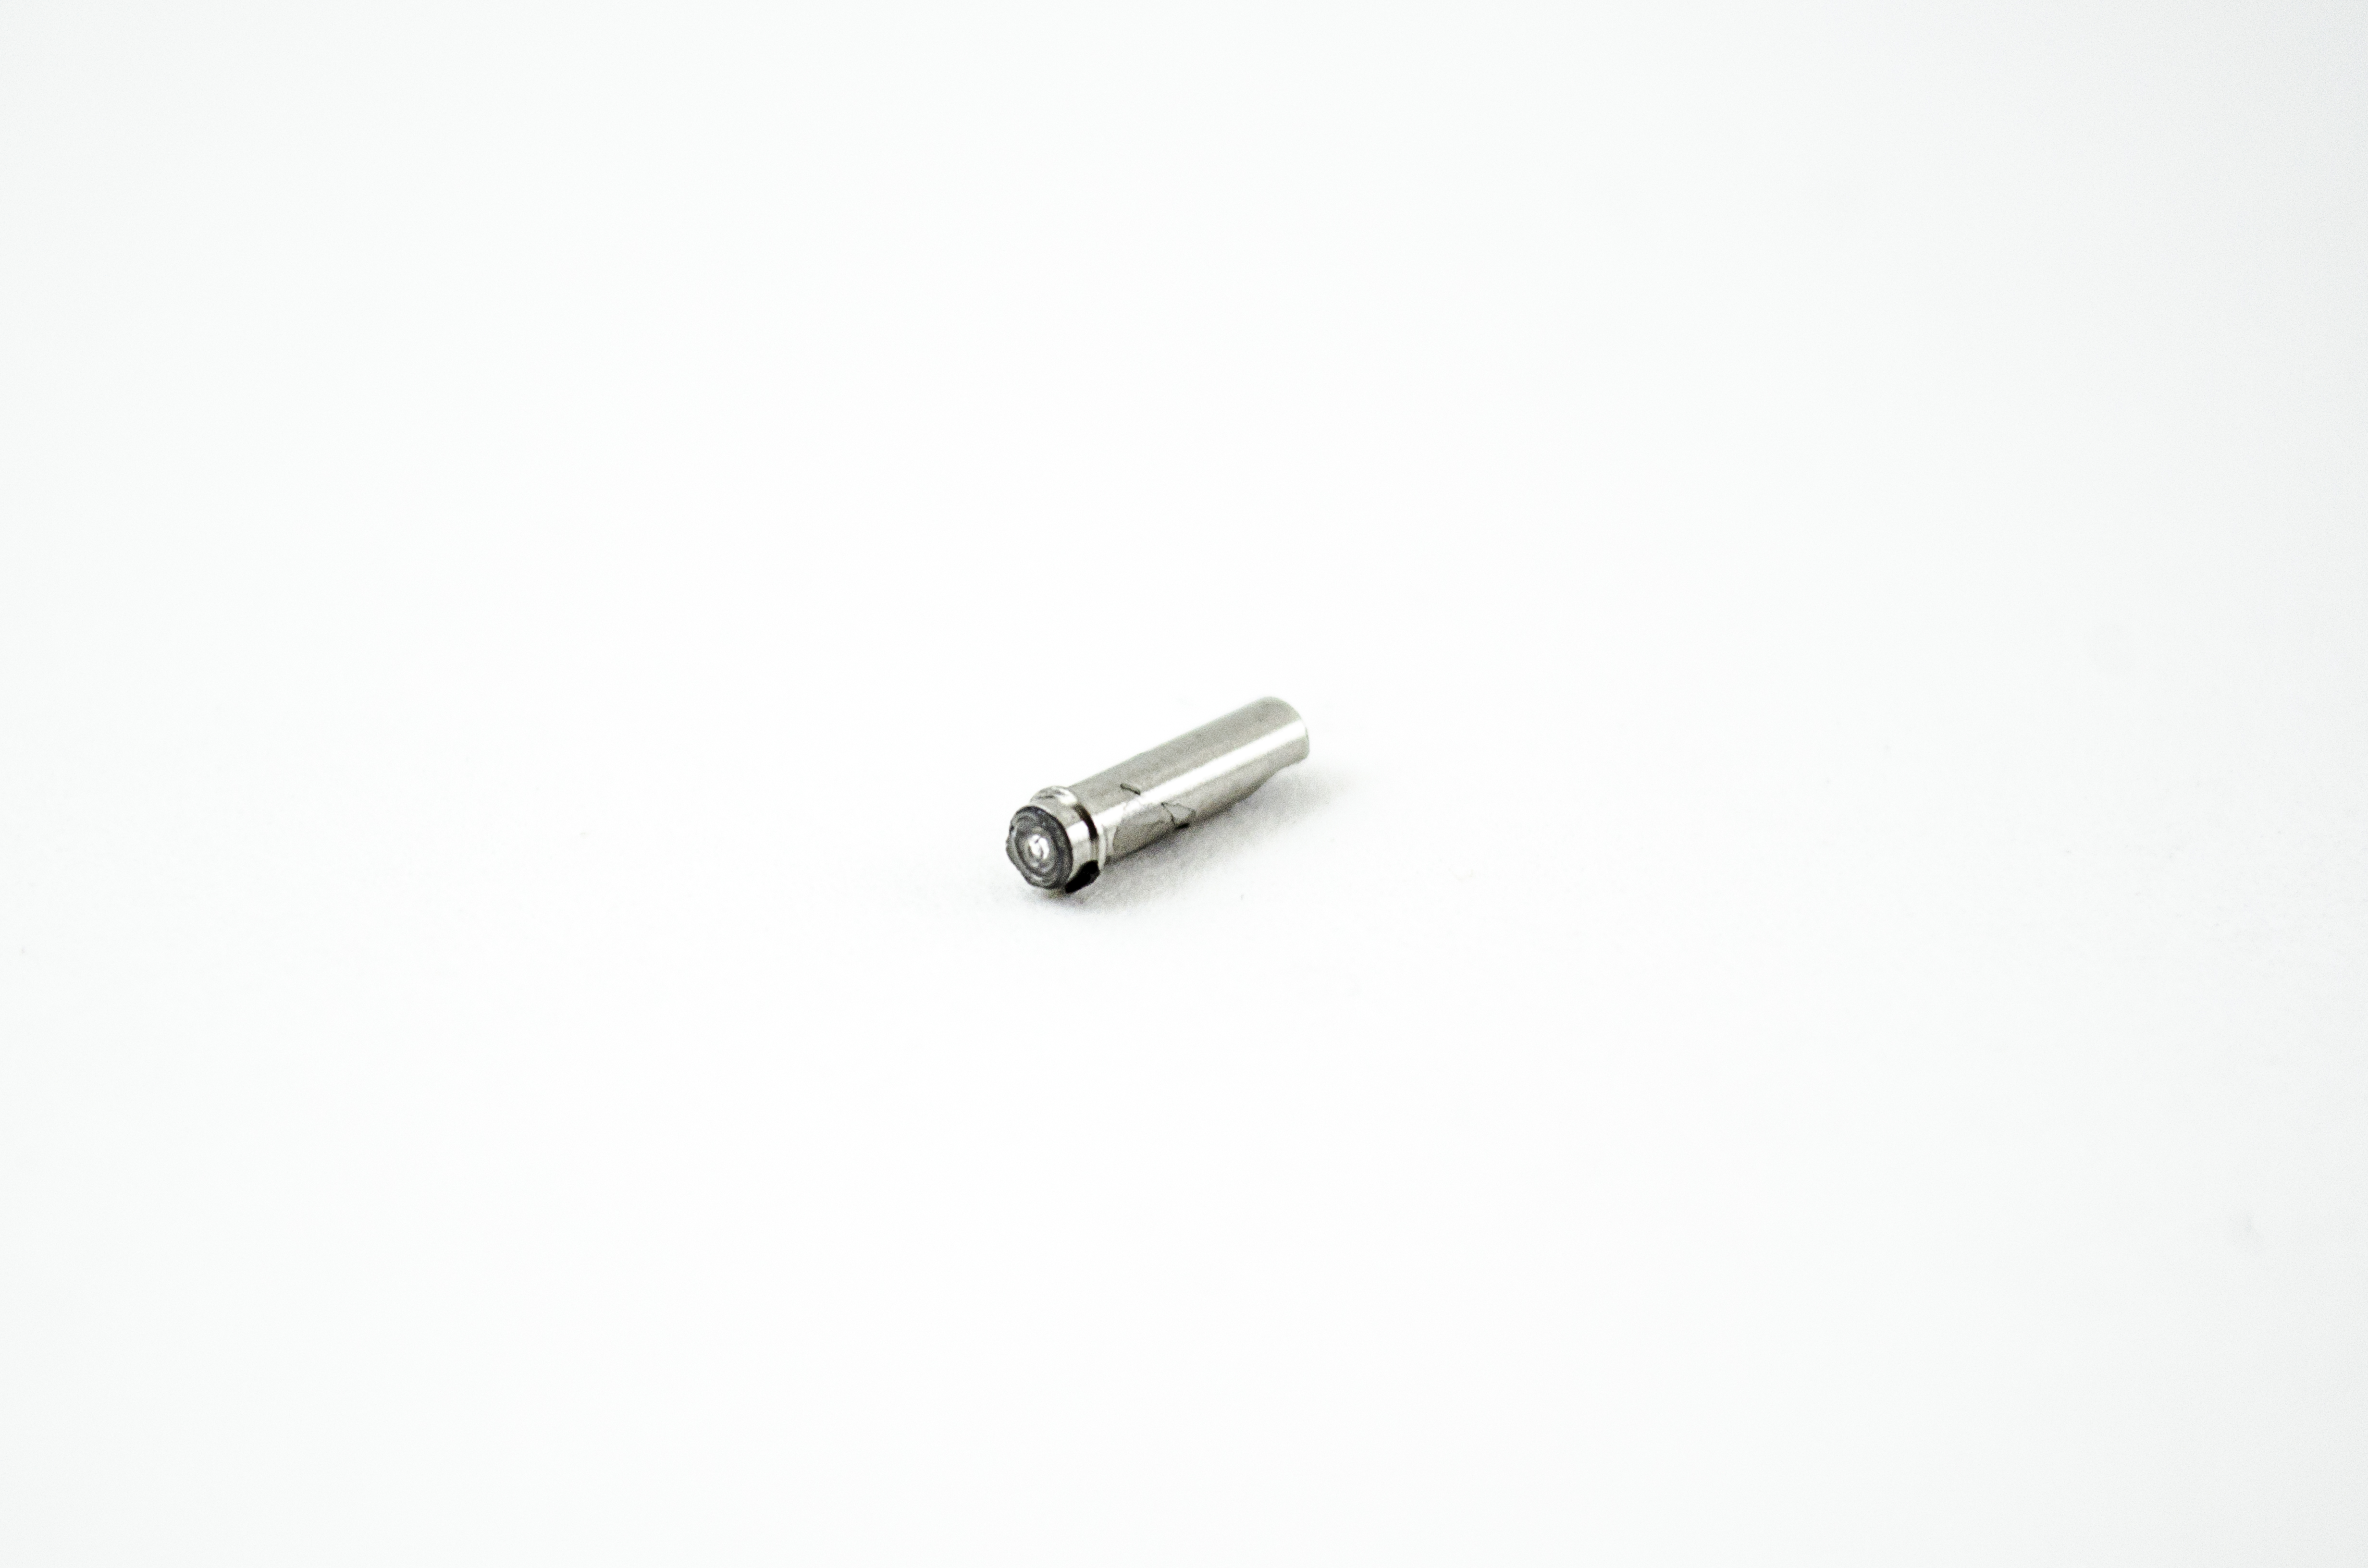 OEM Light Guide Lens Unit - (1.85 mm x 7.70 mm) GIF-160 (U-Side, Larger of Two), GIF-140 (D-Side, Smaller of Two)